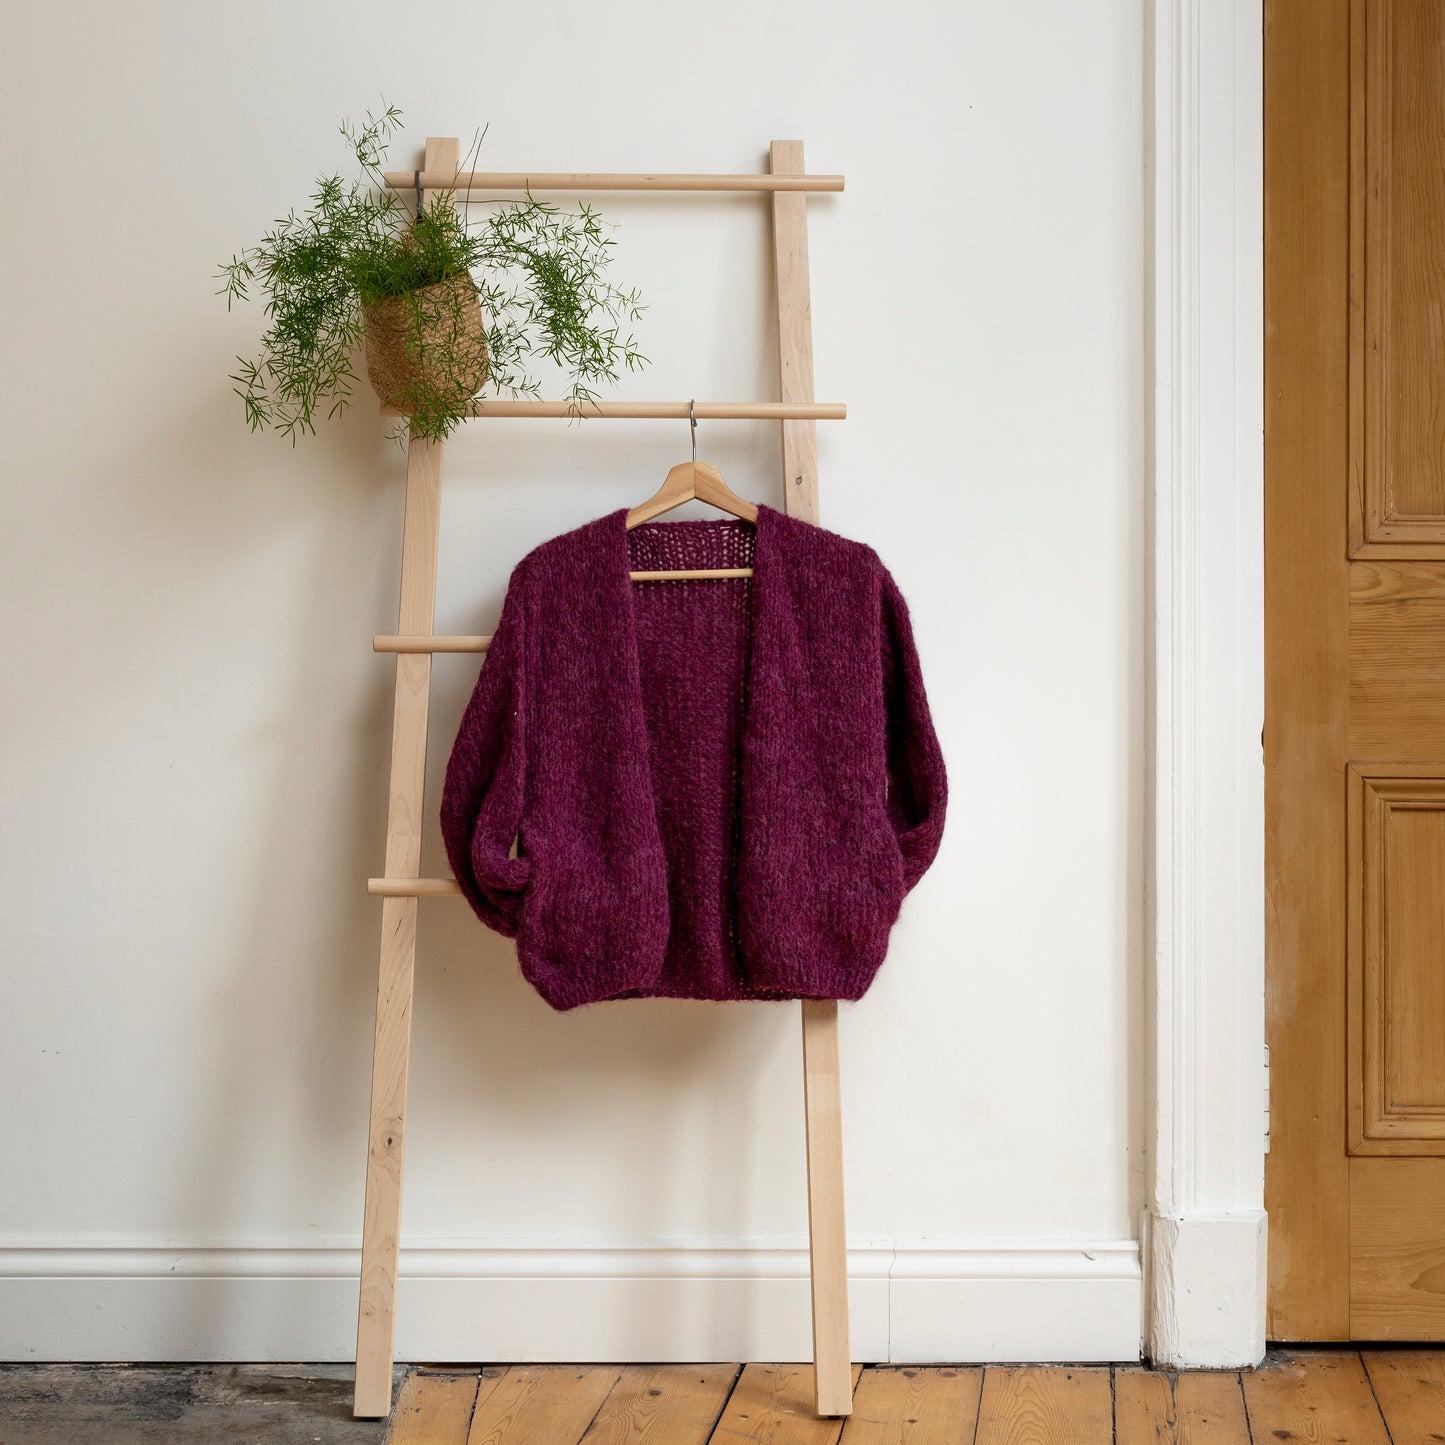 Plum coloured knitted alpaca wool cardigan hanging on wooden steps. Beautiful one-of-a-kind item.